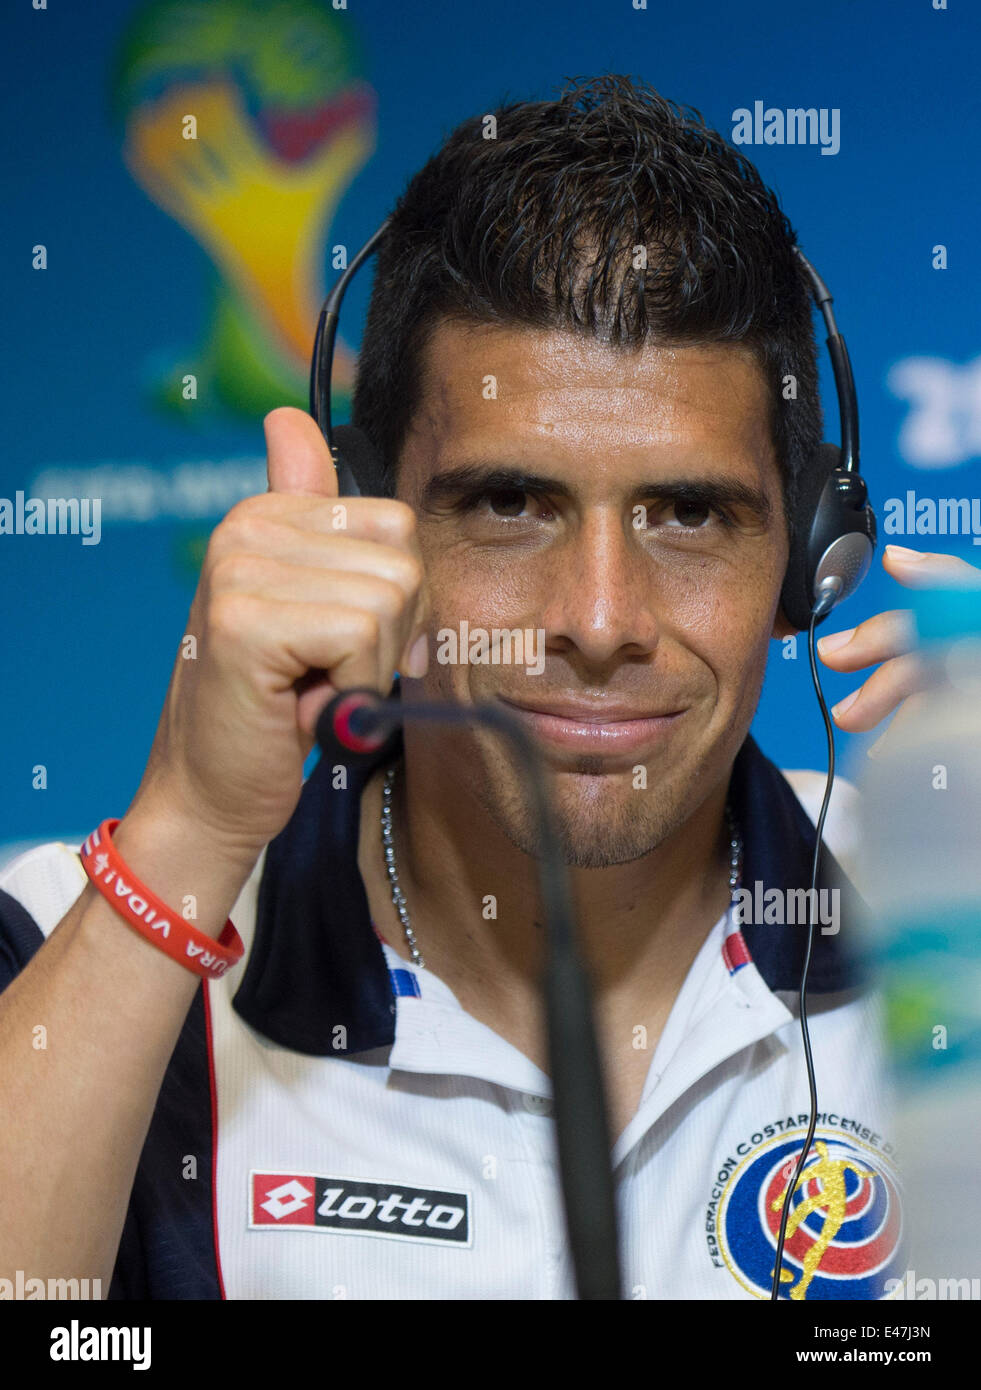 Salvador, Brazil. 4th July, 2014. Costa Rica's Johnny Acosta makes a gesture at a press conference in Salvador, Brazil, on July 4, 2014, one day ahead of a quarter-finals match between Netherlands and Costa Rica of 2014 FIFA World Cup. Credit:  Yang Lei/Xinhua/Alamy Live News Stock Photo